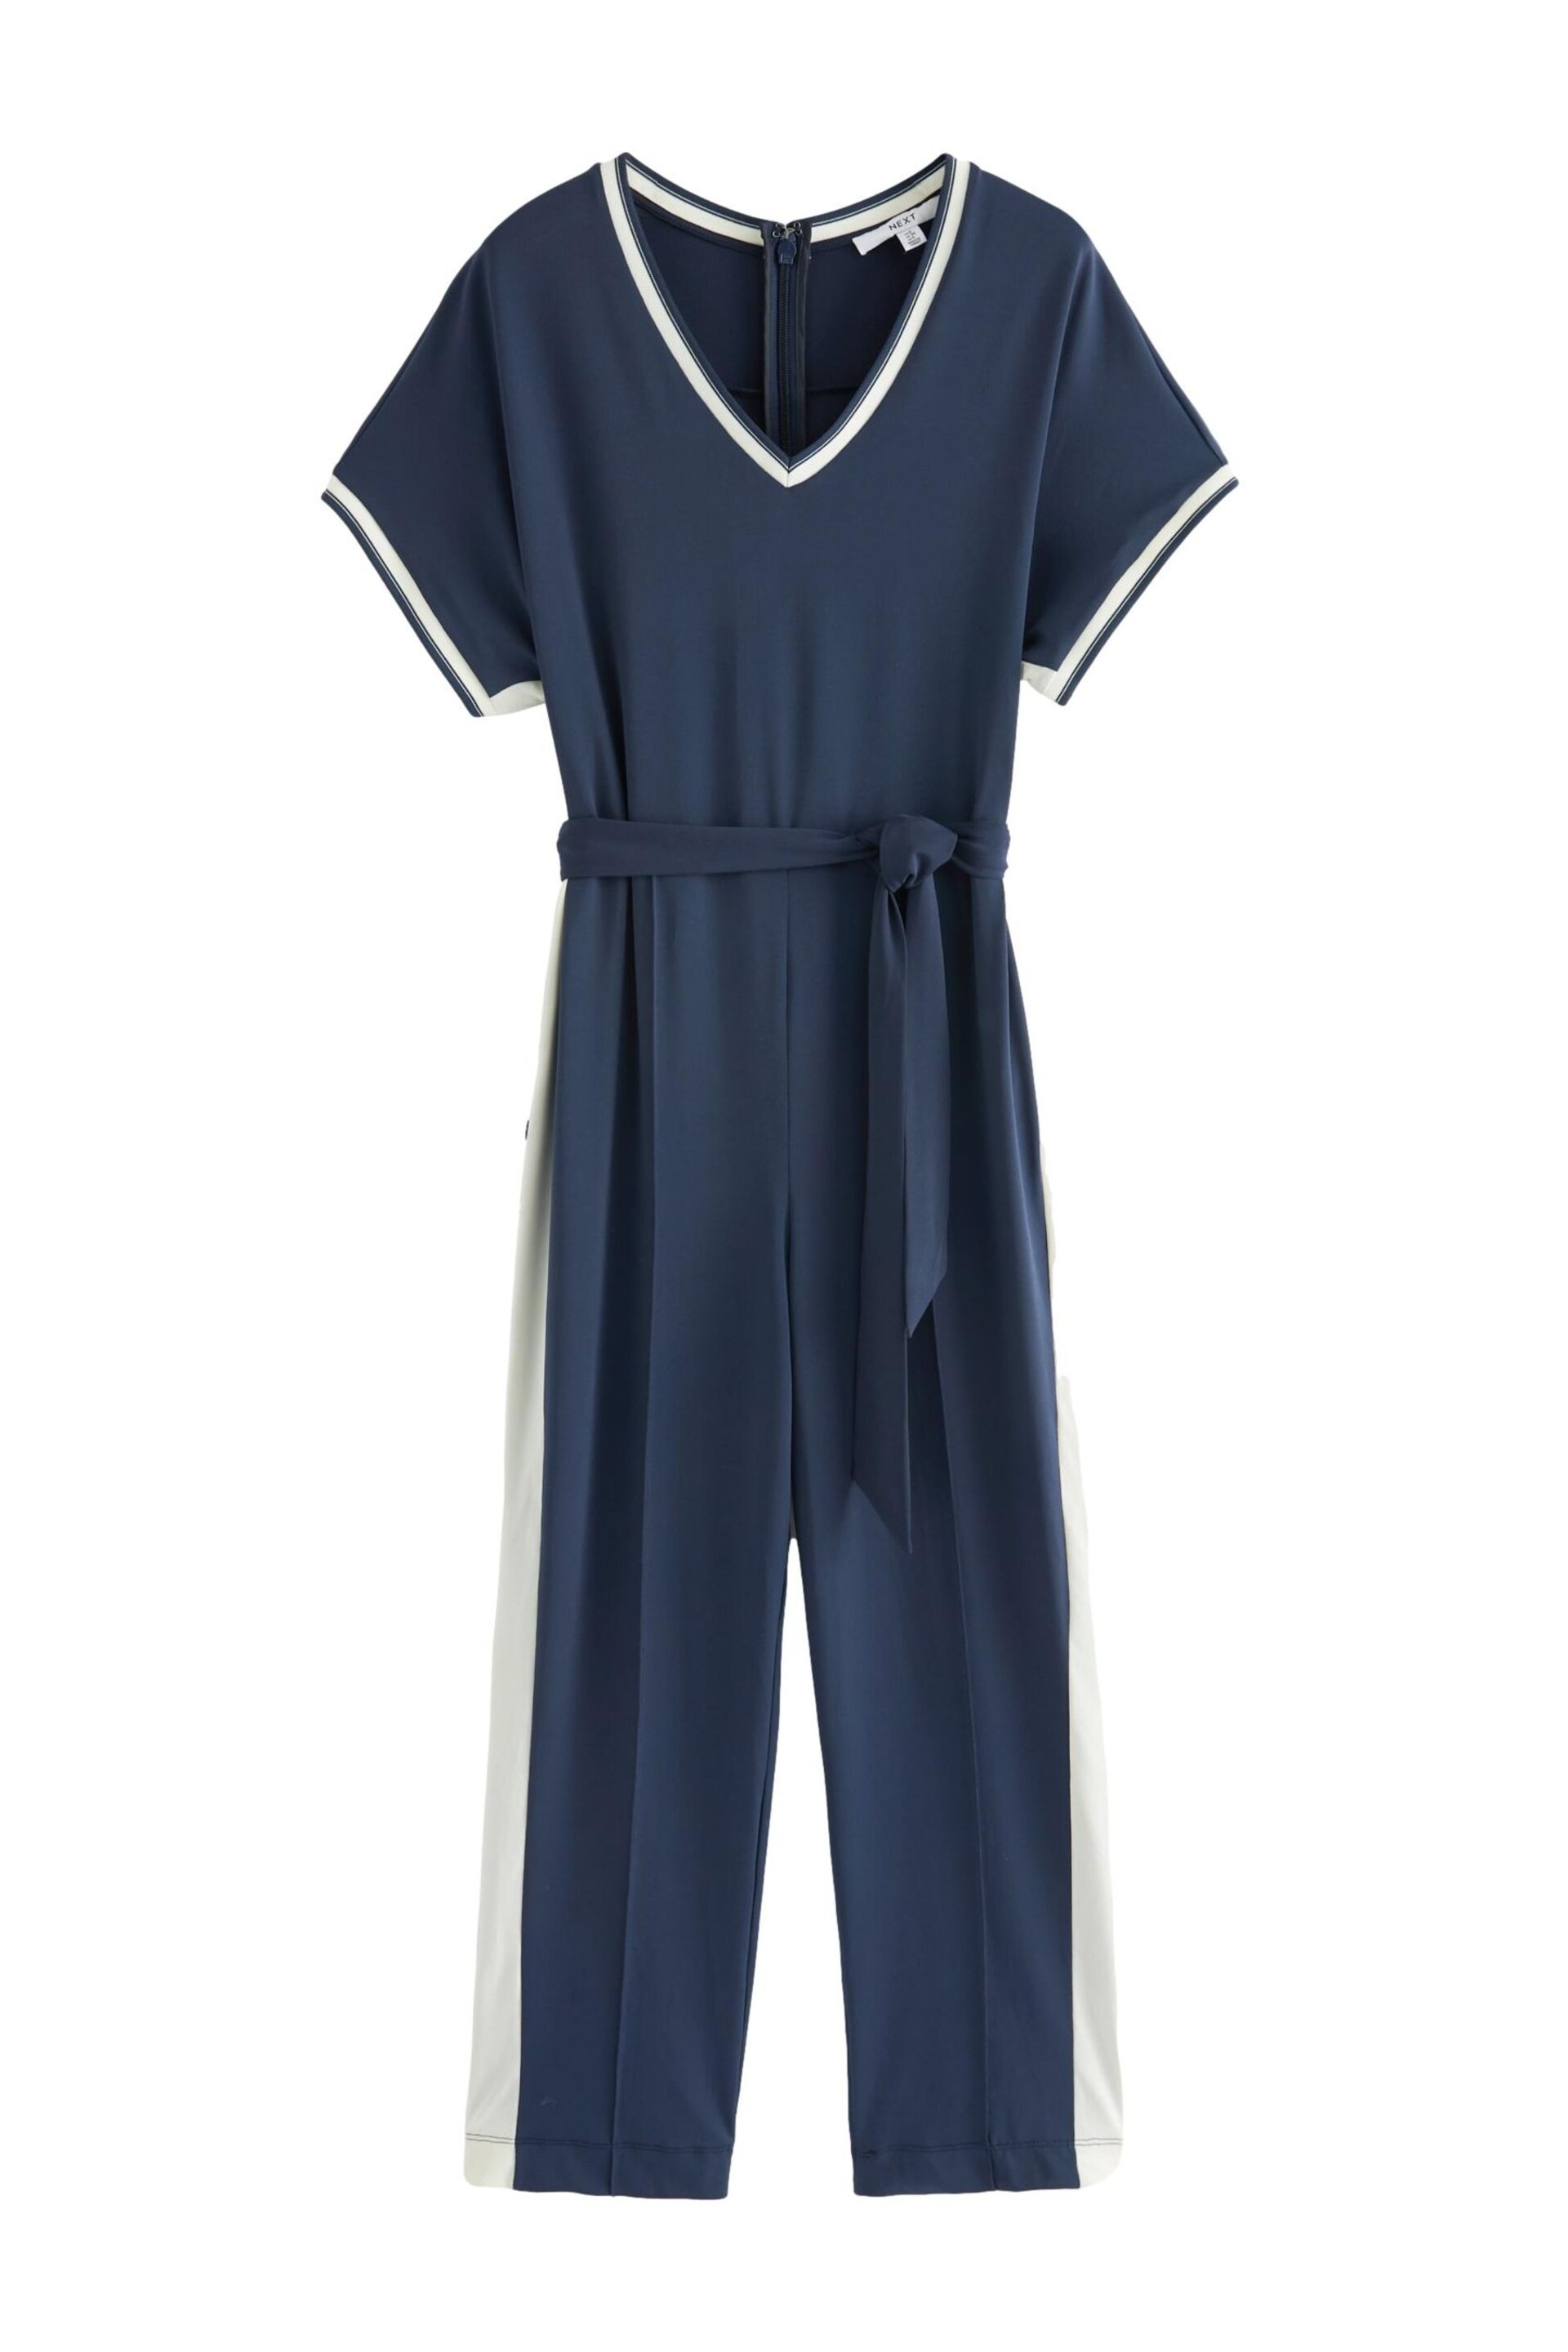 Navy Blue Short Sleeve Tipped Jumpsuit - Image 5 of 6